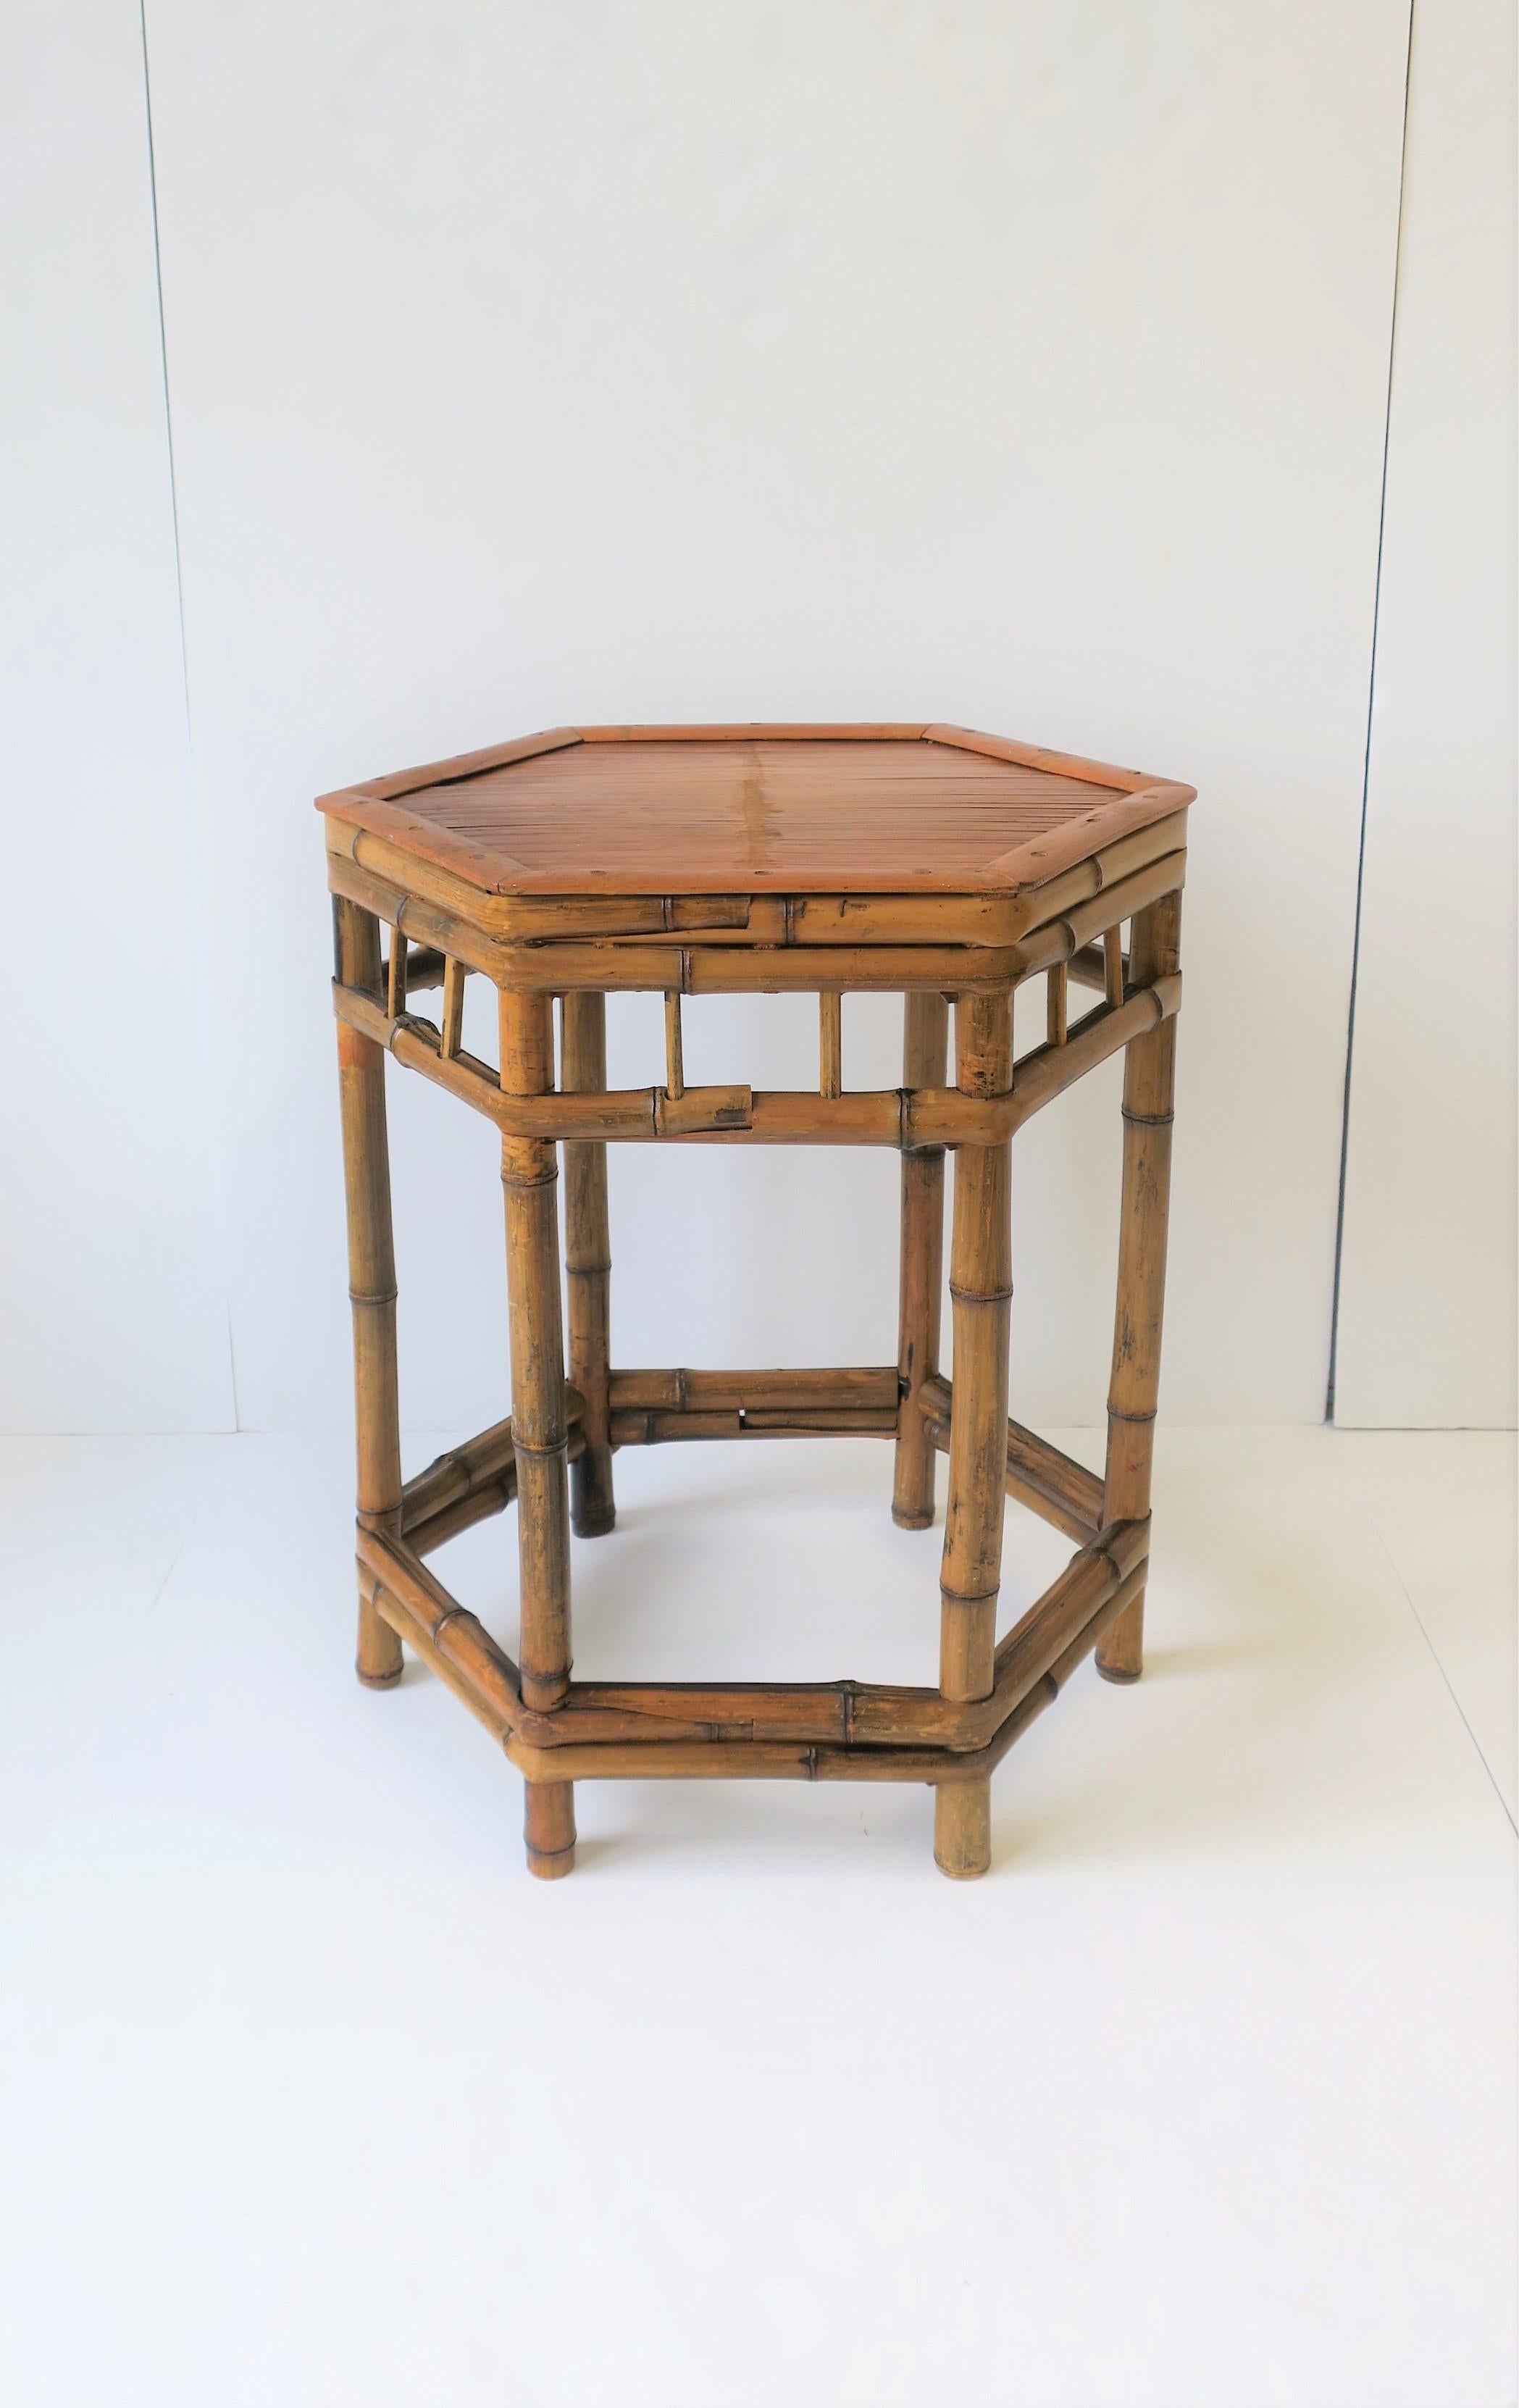 An octagonal shaped bamboo end or side table. The octagonal shape is a nice alternative to round. Table is a nice size too, not to big or small. 

Table measures: 18